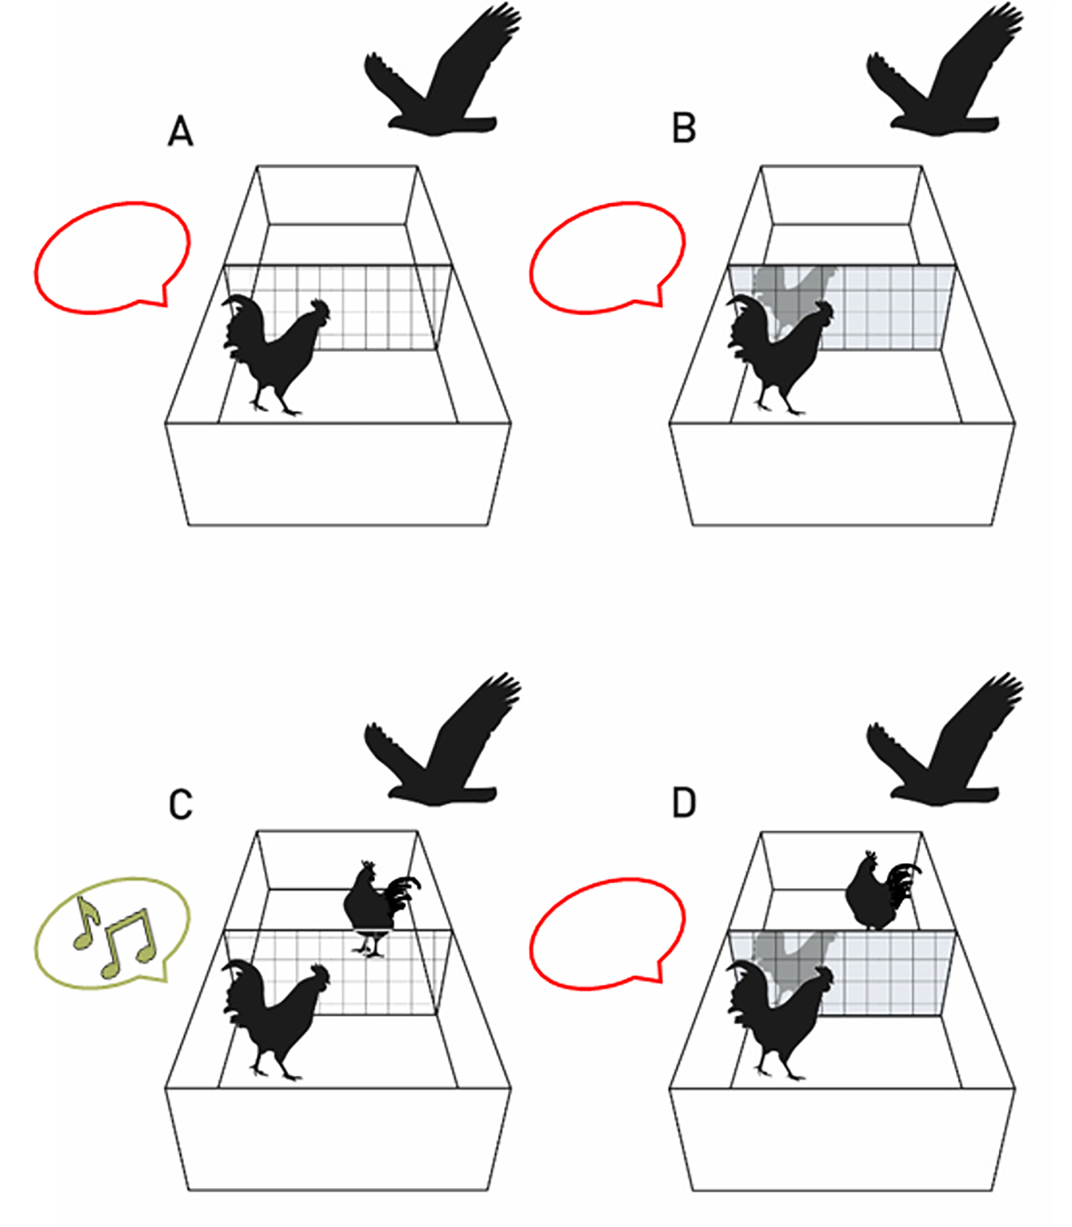 4 diagrams: A) rooster alone with hawk flying above, making no sound; B) rooster with mirror and hawk above, no sound; C) rooster with another rooster and no mirror, a hawk above, makes call; D) rooster with another it can't see behind a mirror, no sound